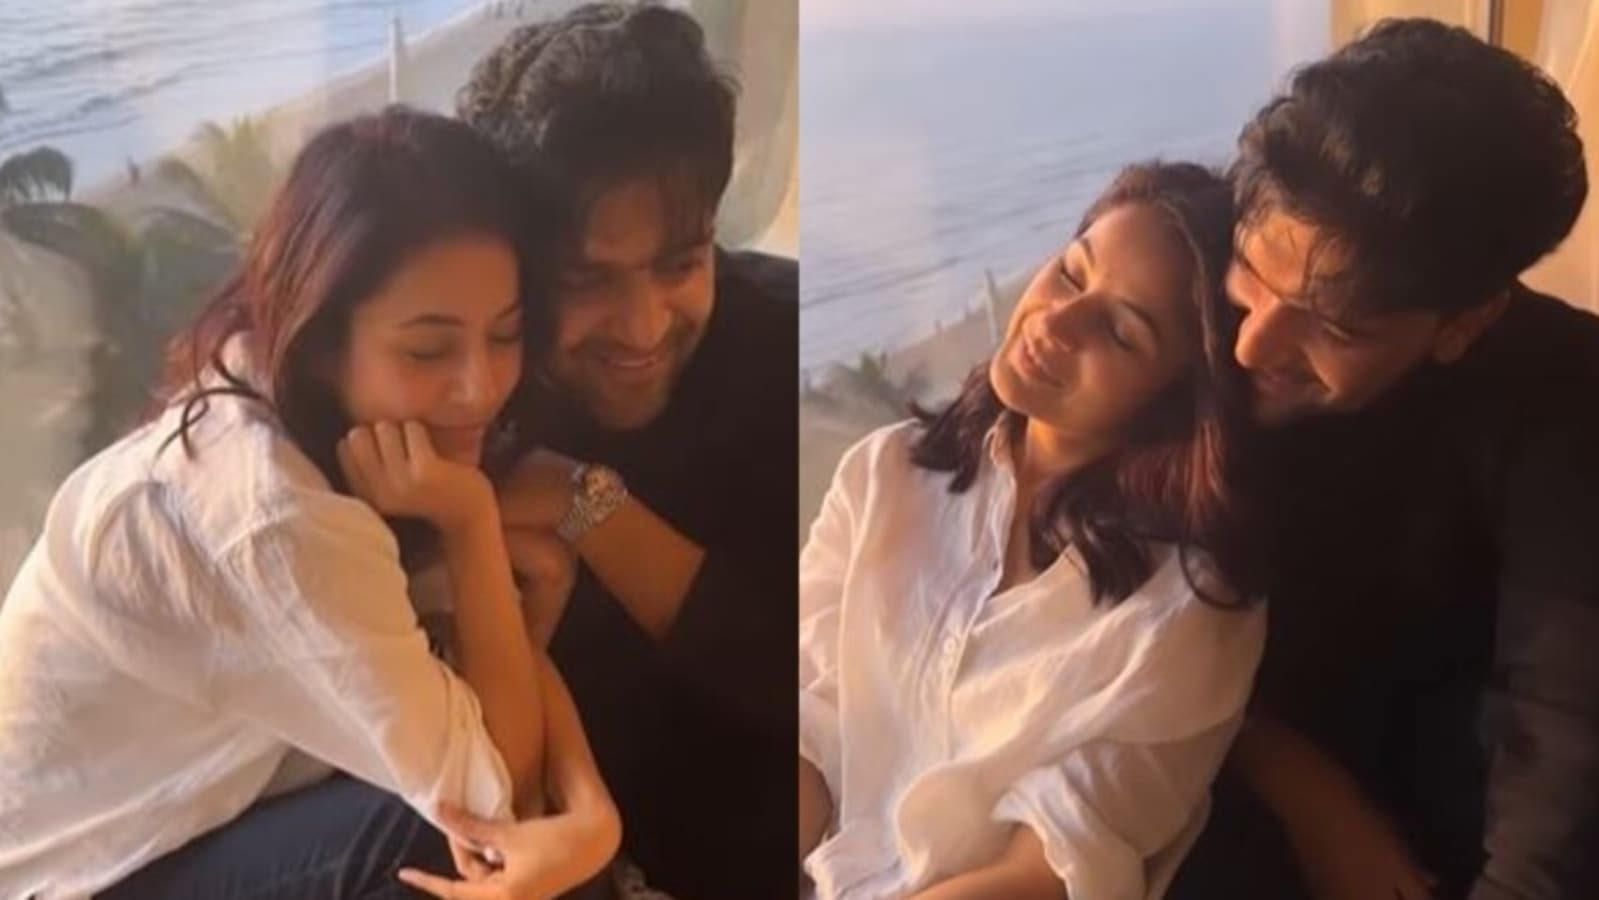 Shehnaaz Gill and Guru Randhawa get mushy, share fun moments as they enjoy sunset in new video; fans ask them to date